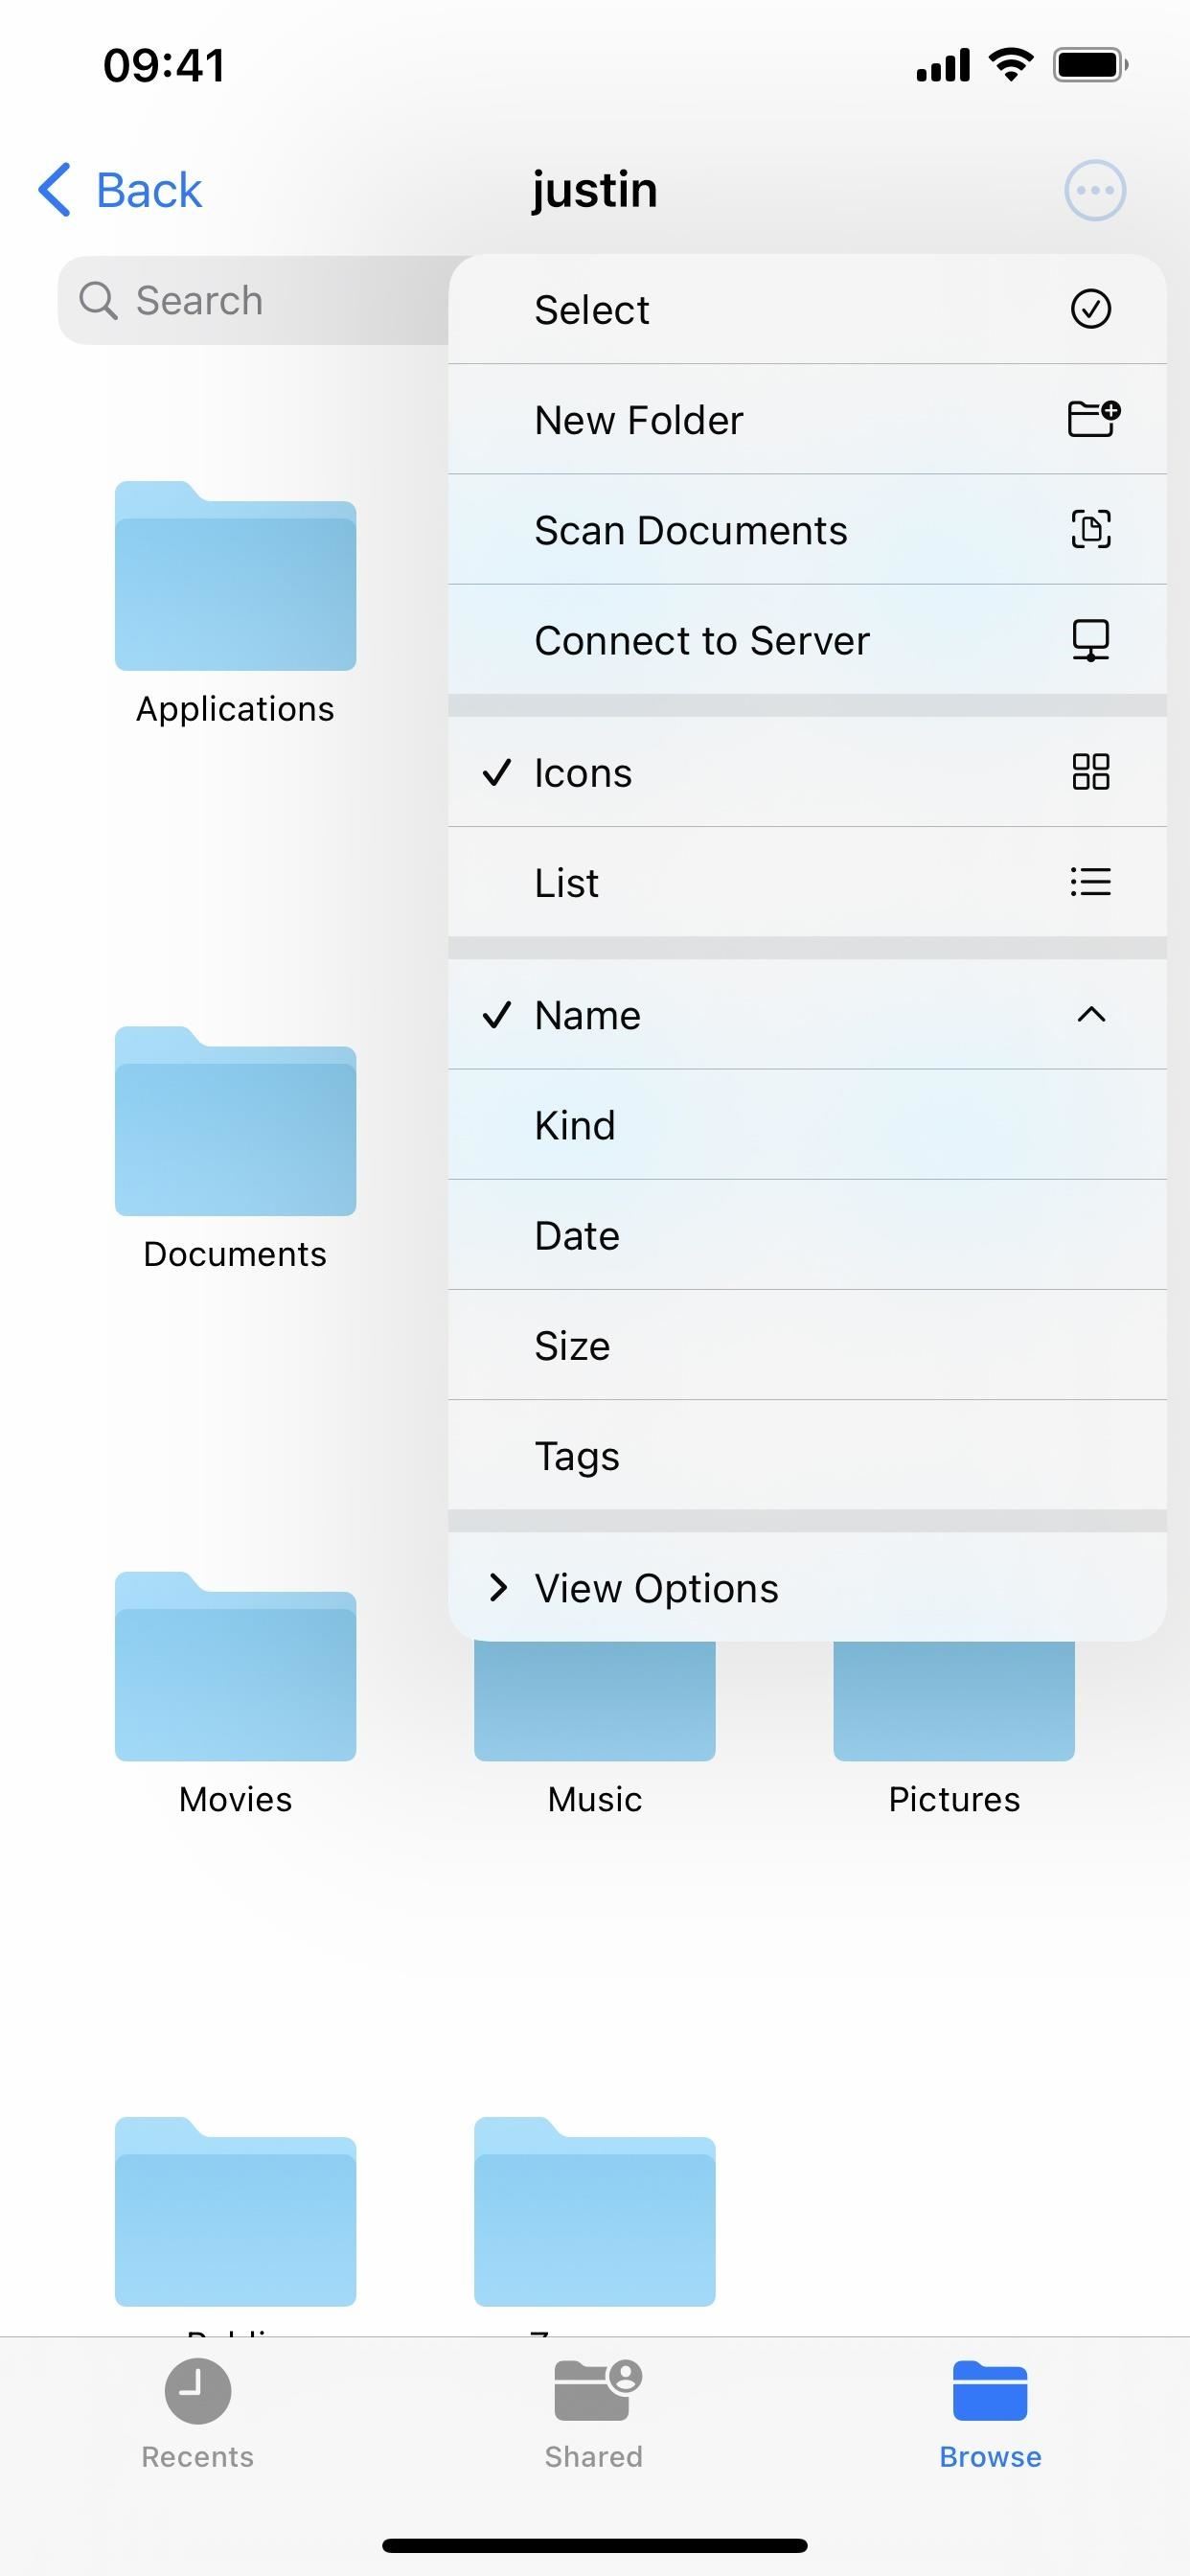 Access All Your Mac's Files Right on Your iPhone or iPad — No Third-Party Software Needed